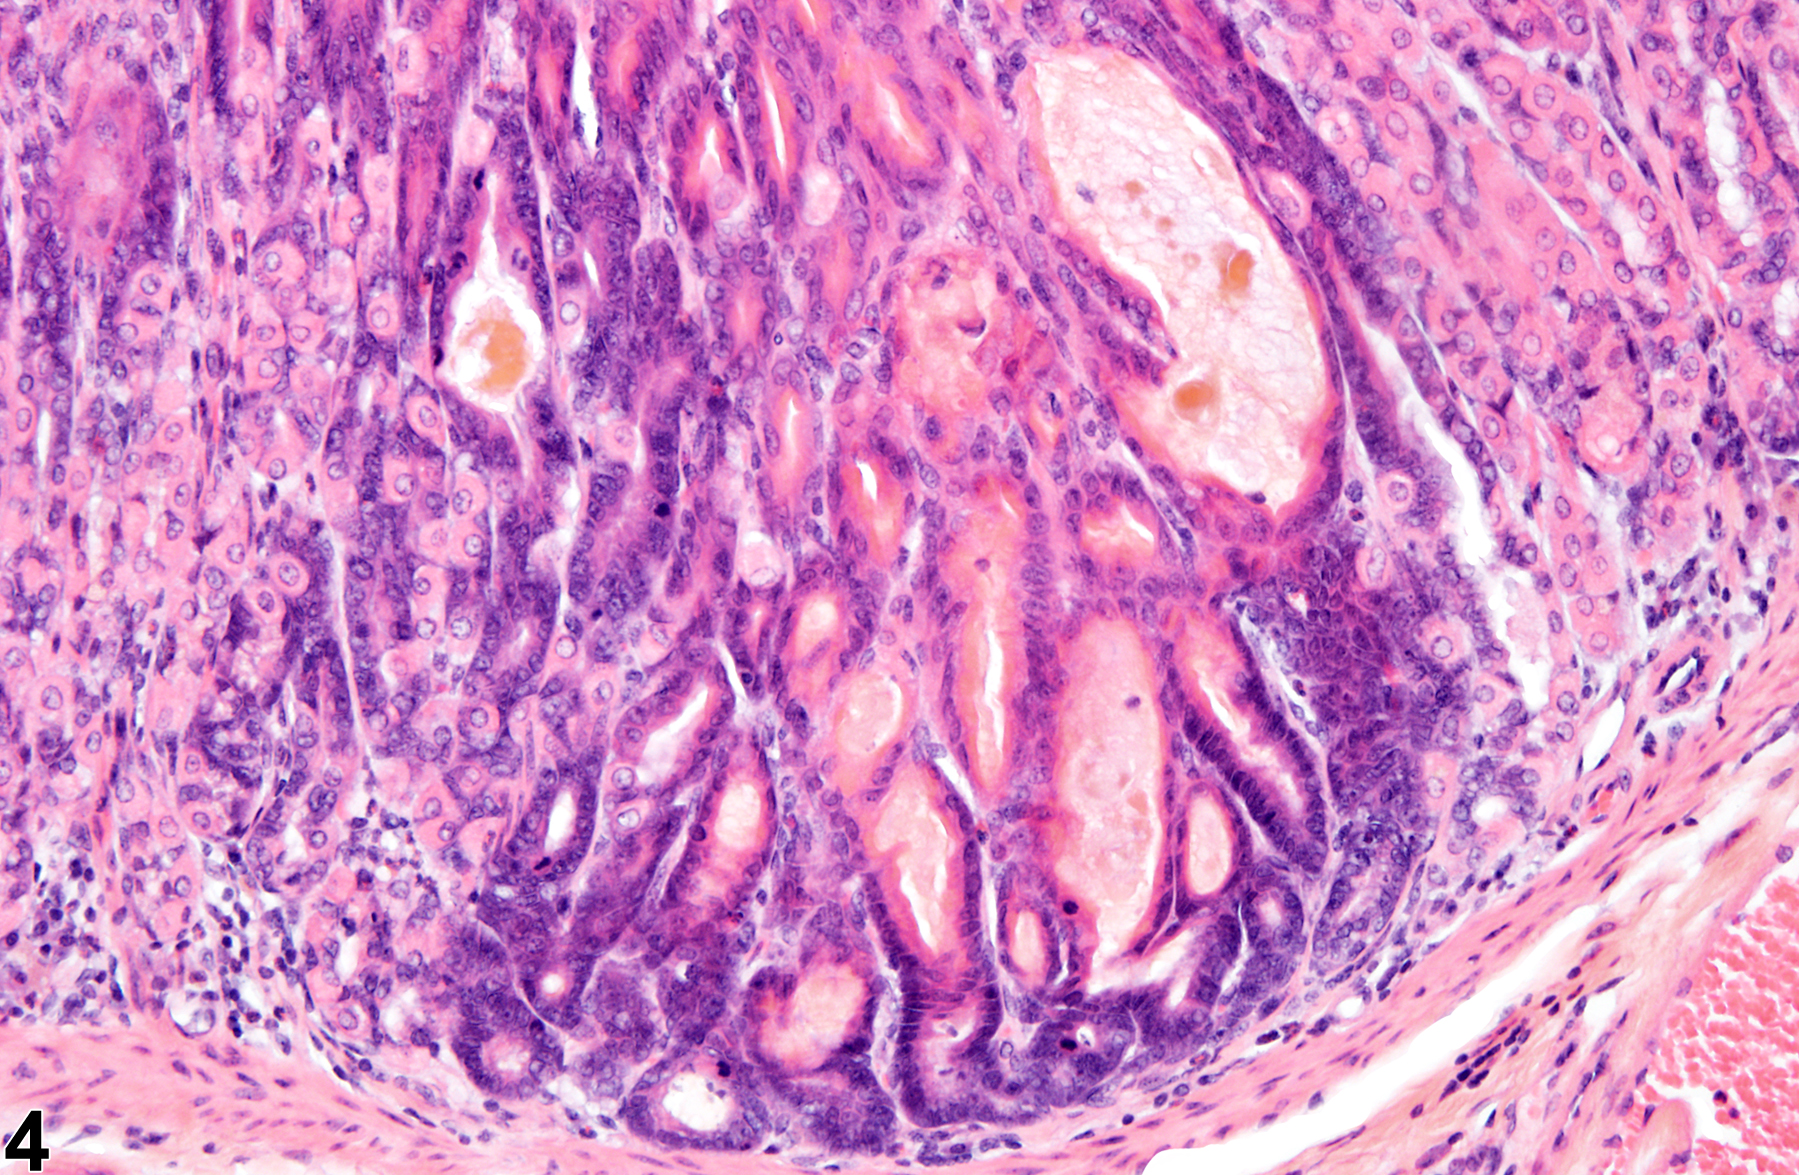 Image of hyperplasia in the glandular stomach epithelium from a male B6C3F1 mouse in a chronic study